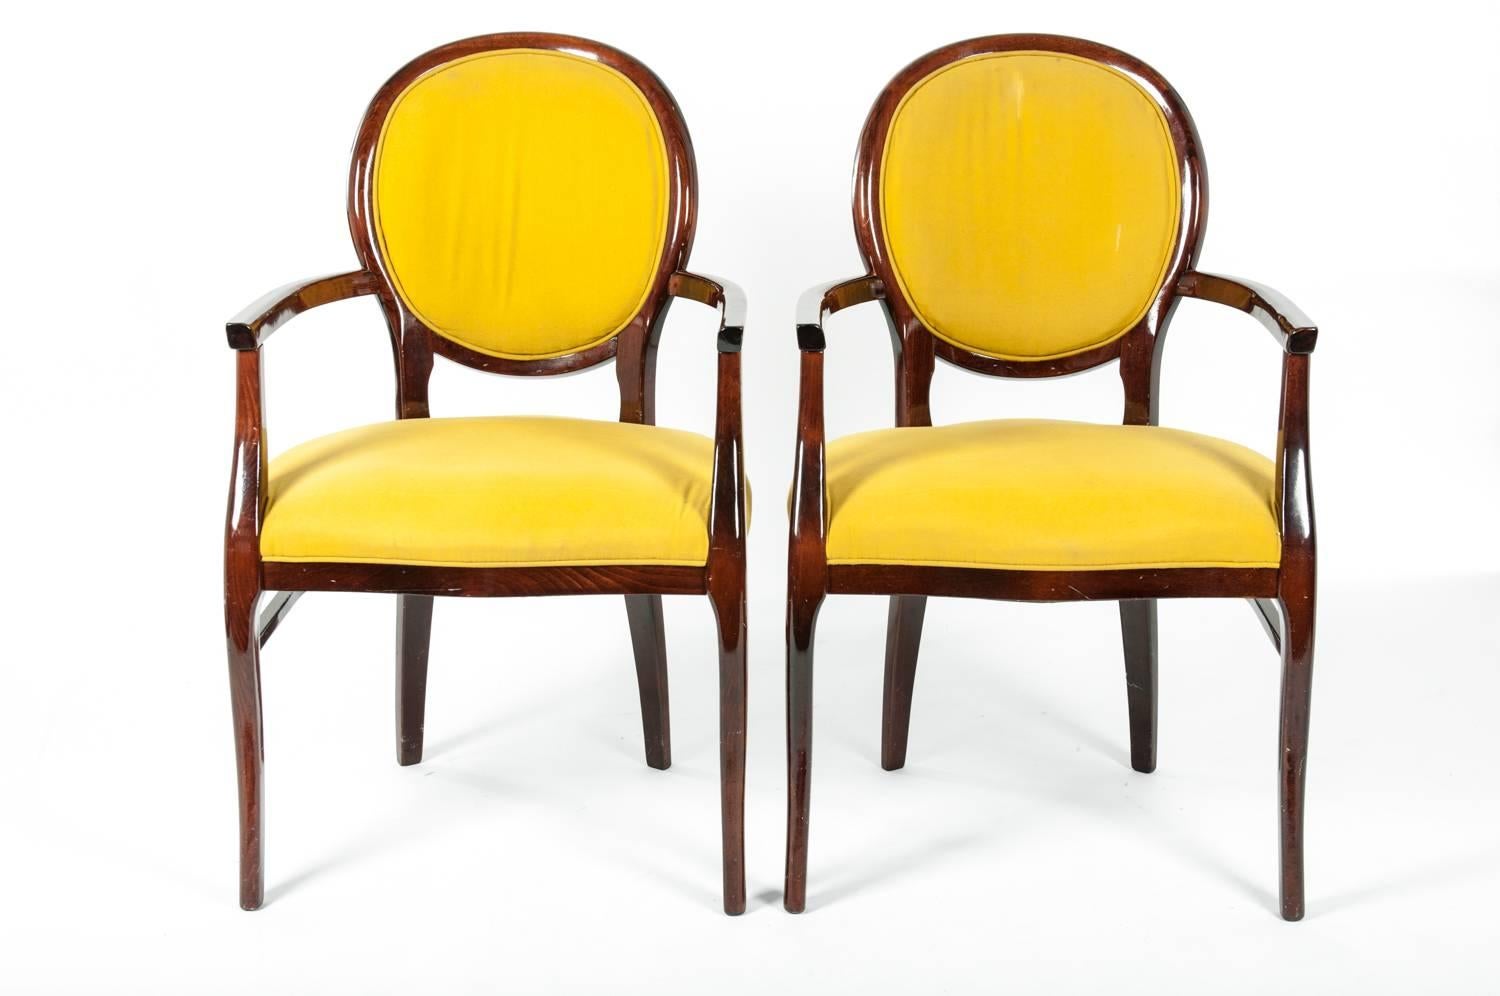 Mid-Century Modern Art Deco pair of chairs. Each chair measure 37 inches high X 22 inches length X 20 inches dept. Seat high 18 inches.